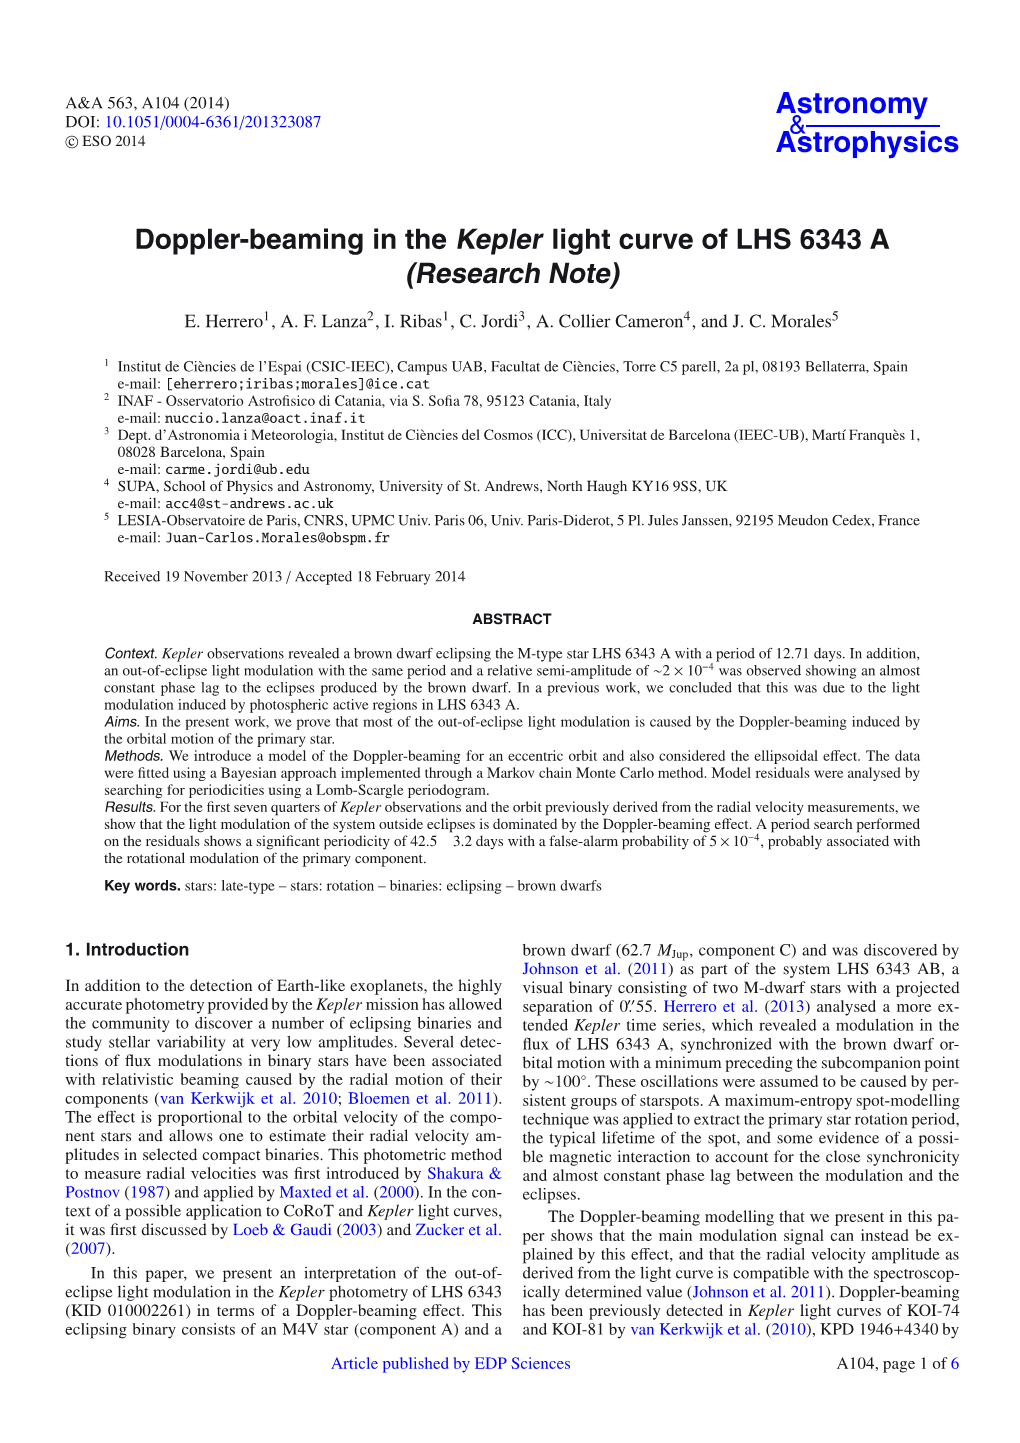 Doppler-Beaming in the Kepler Light Curve of LHS 6343 a (Research Note)